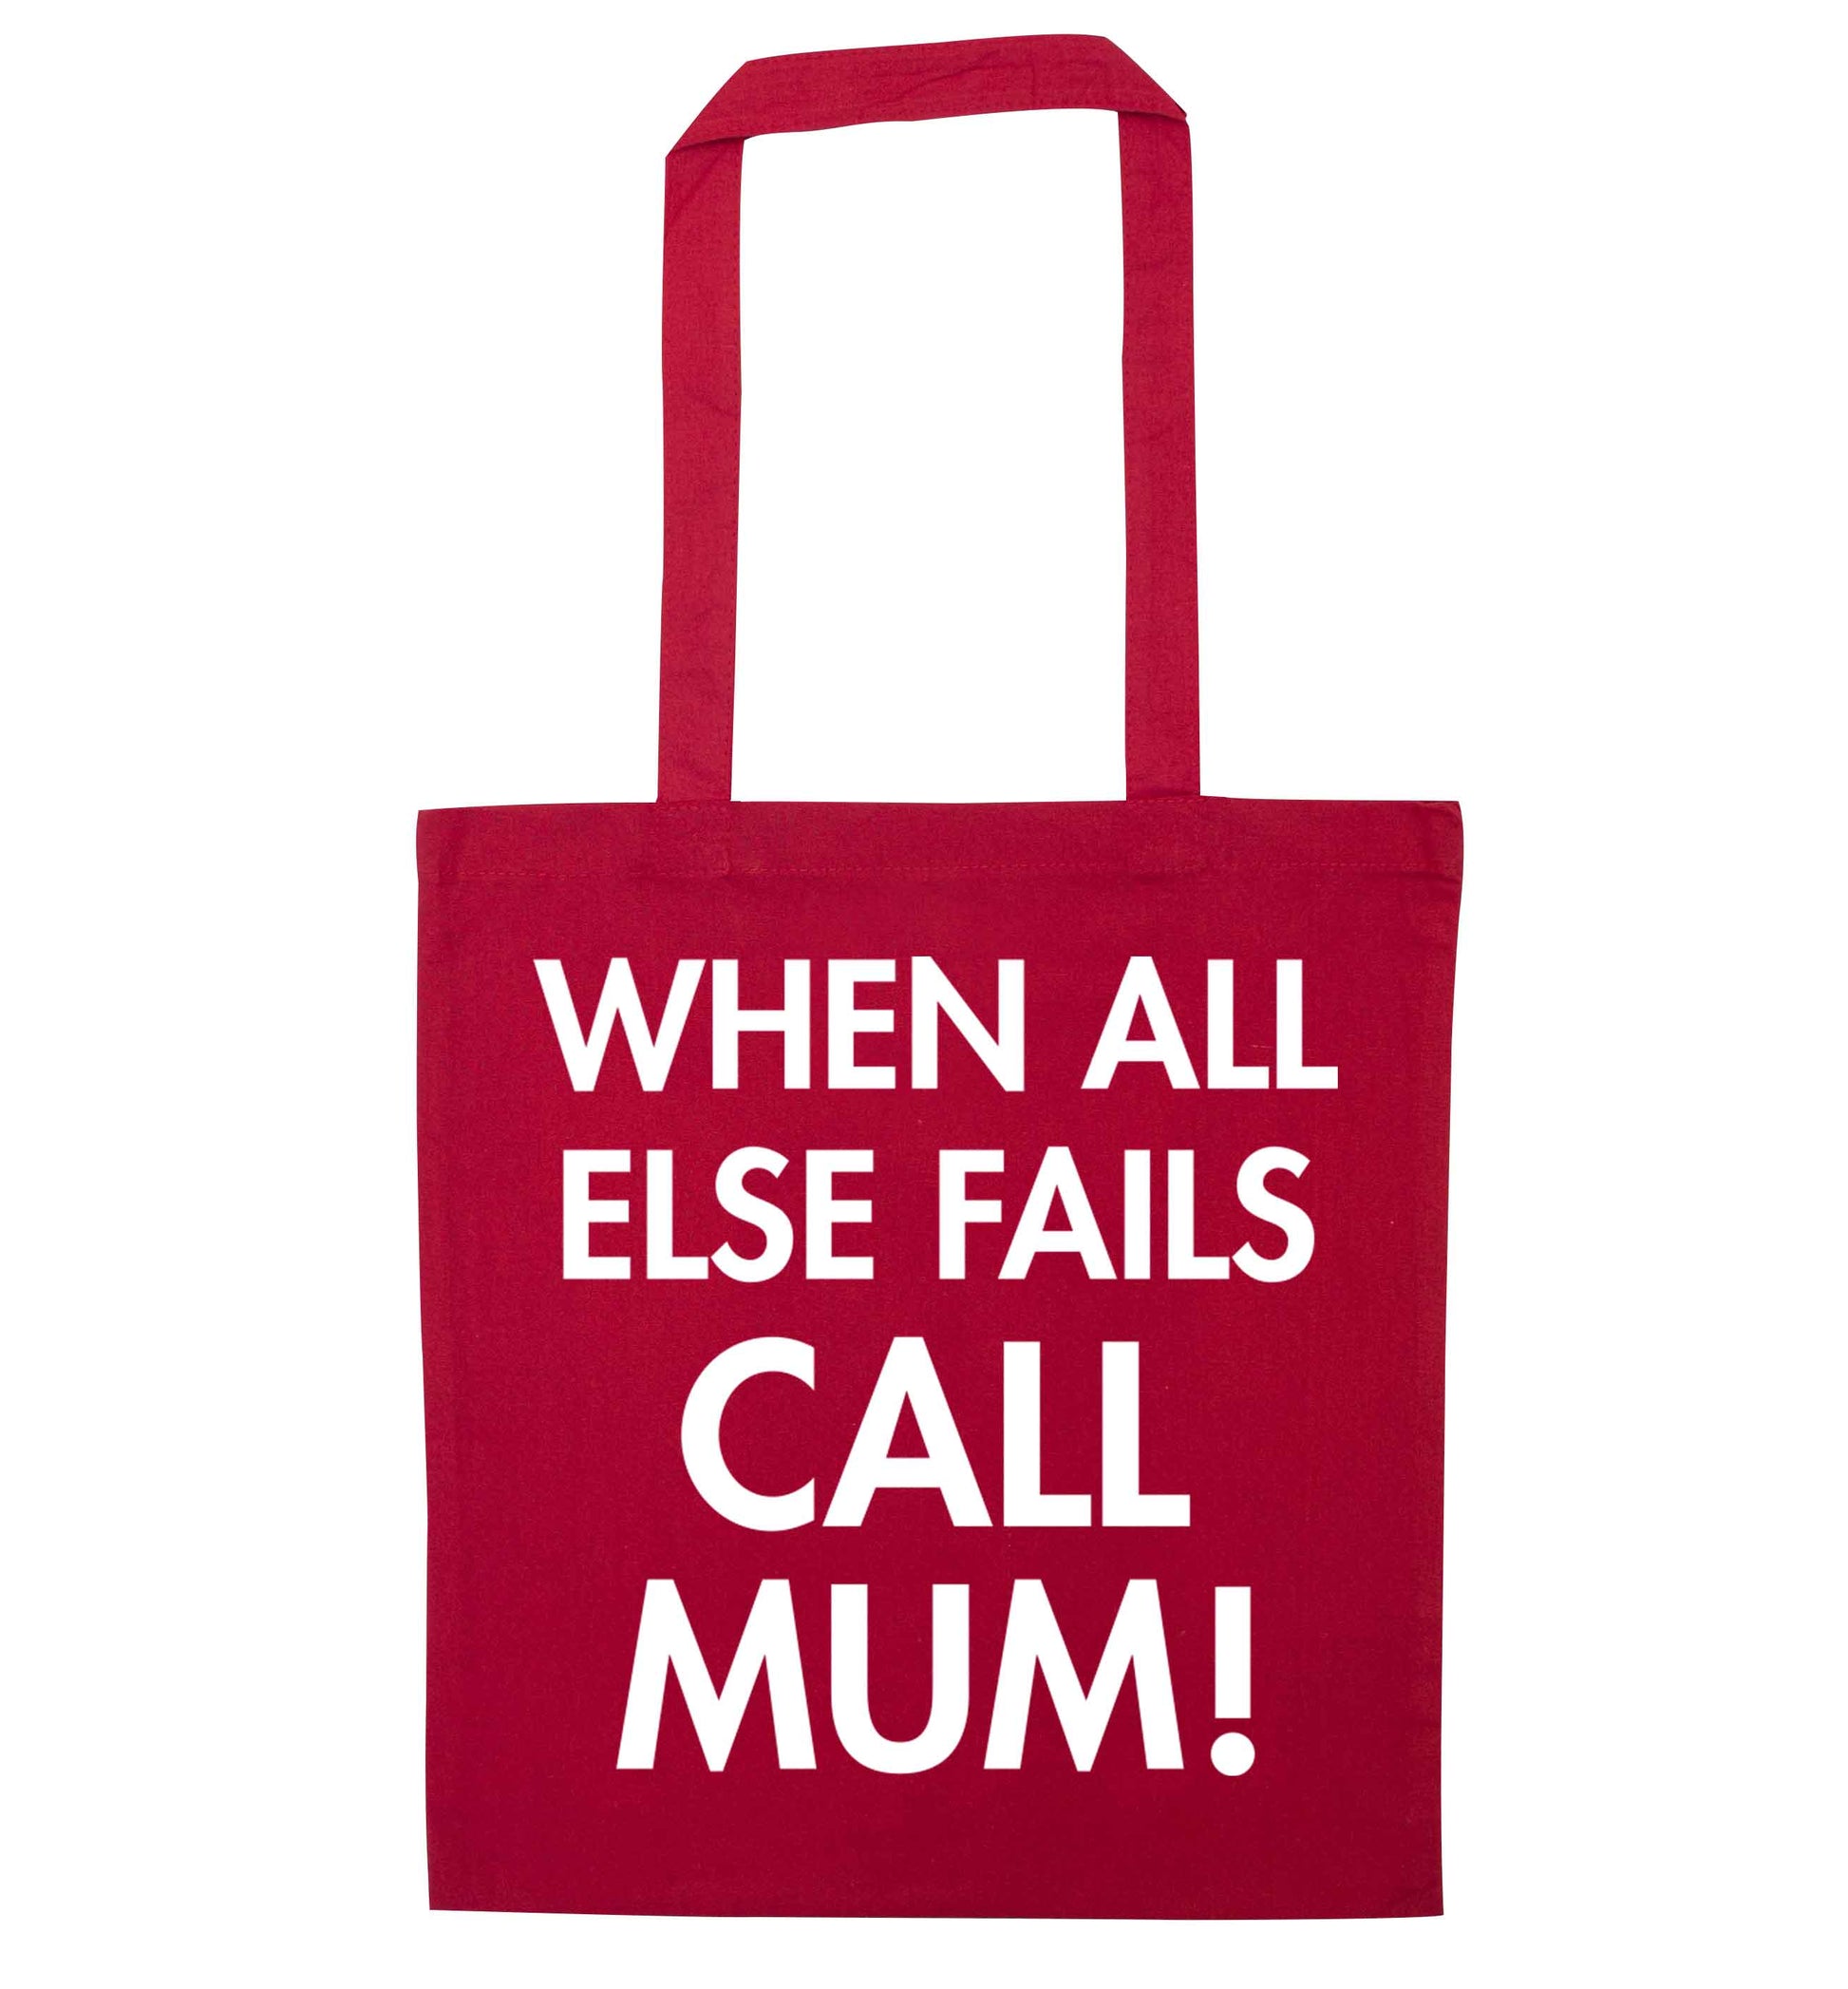 When all else fails call mum! red tote bag